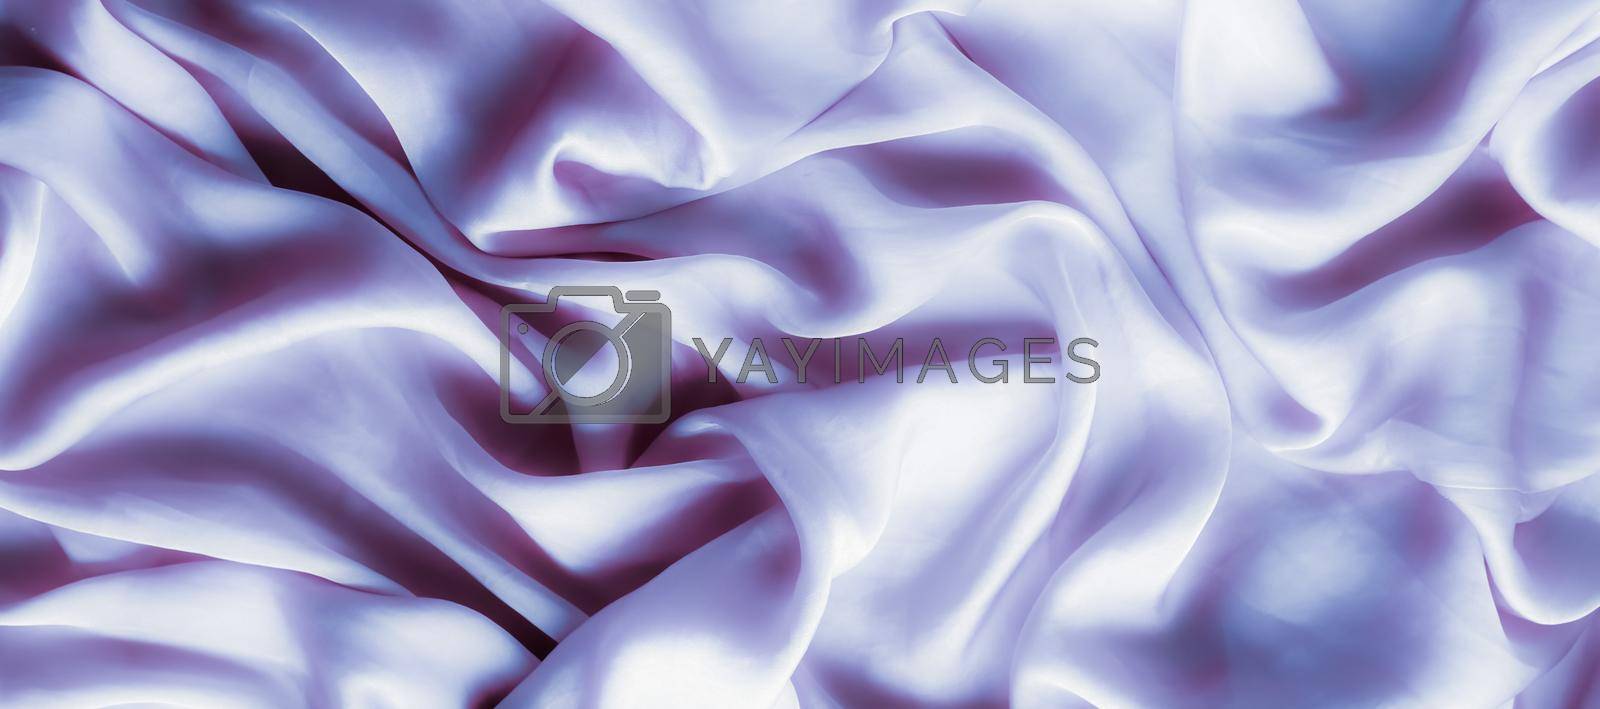 Royalty free image of Purple soft silk texture, flatlay background by Anneleven